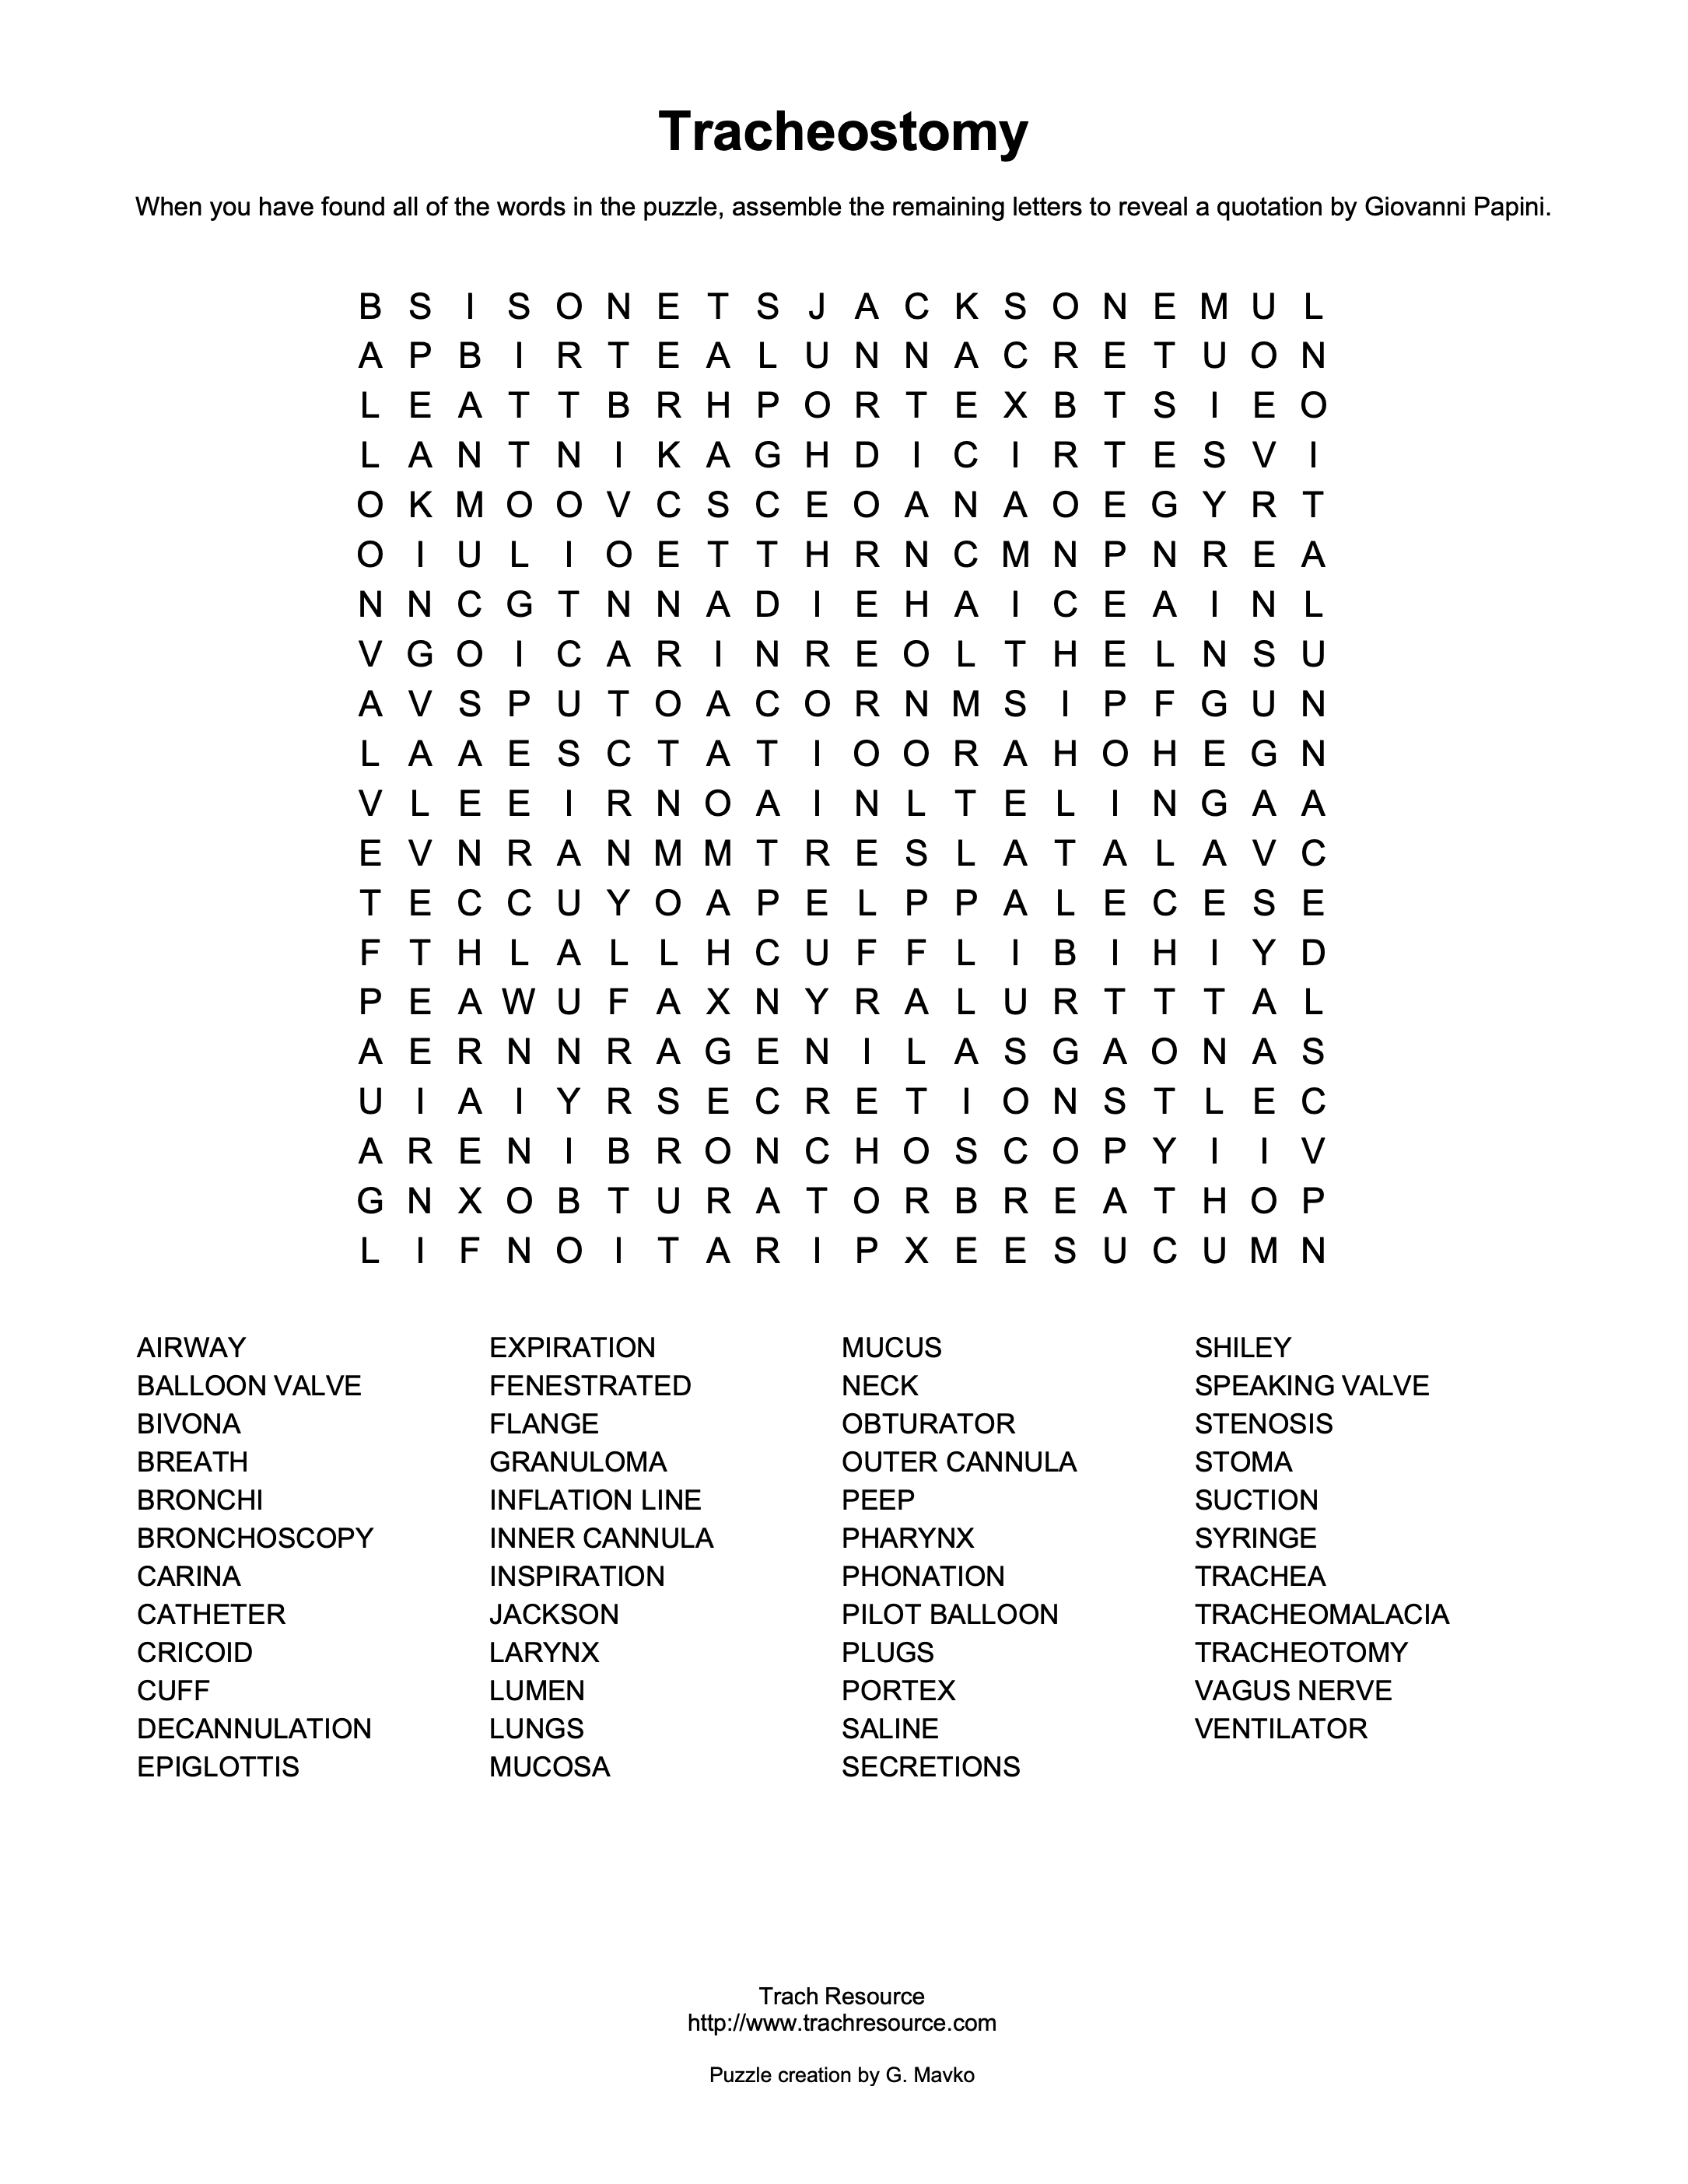 Tracheostomy Word Search Puzzle